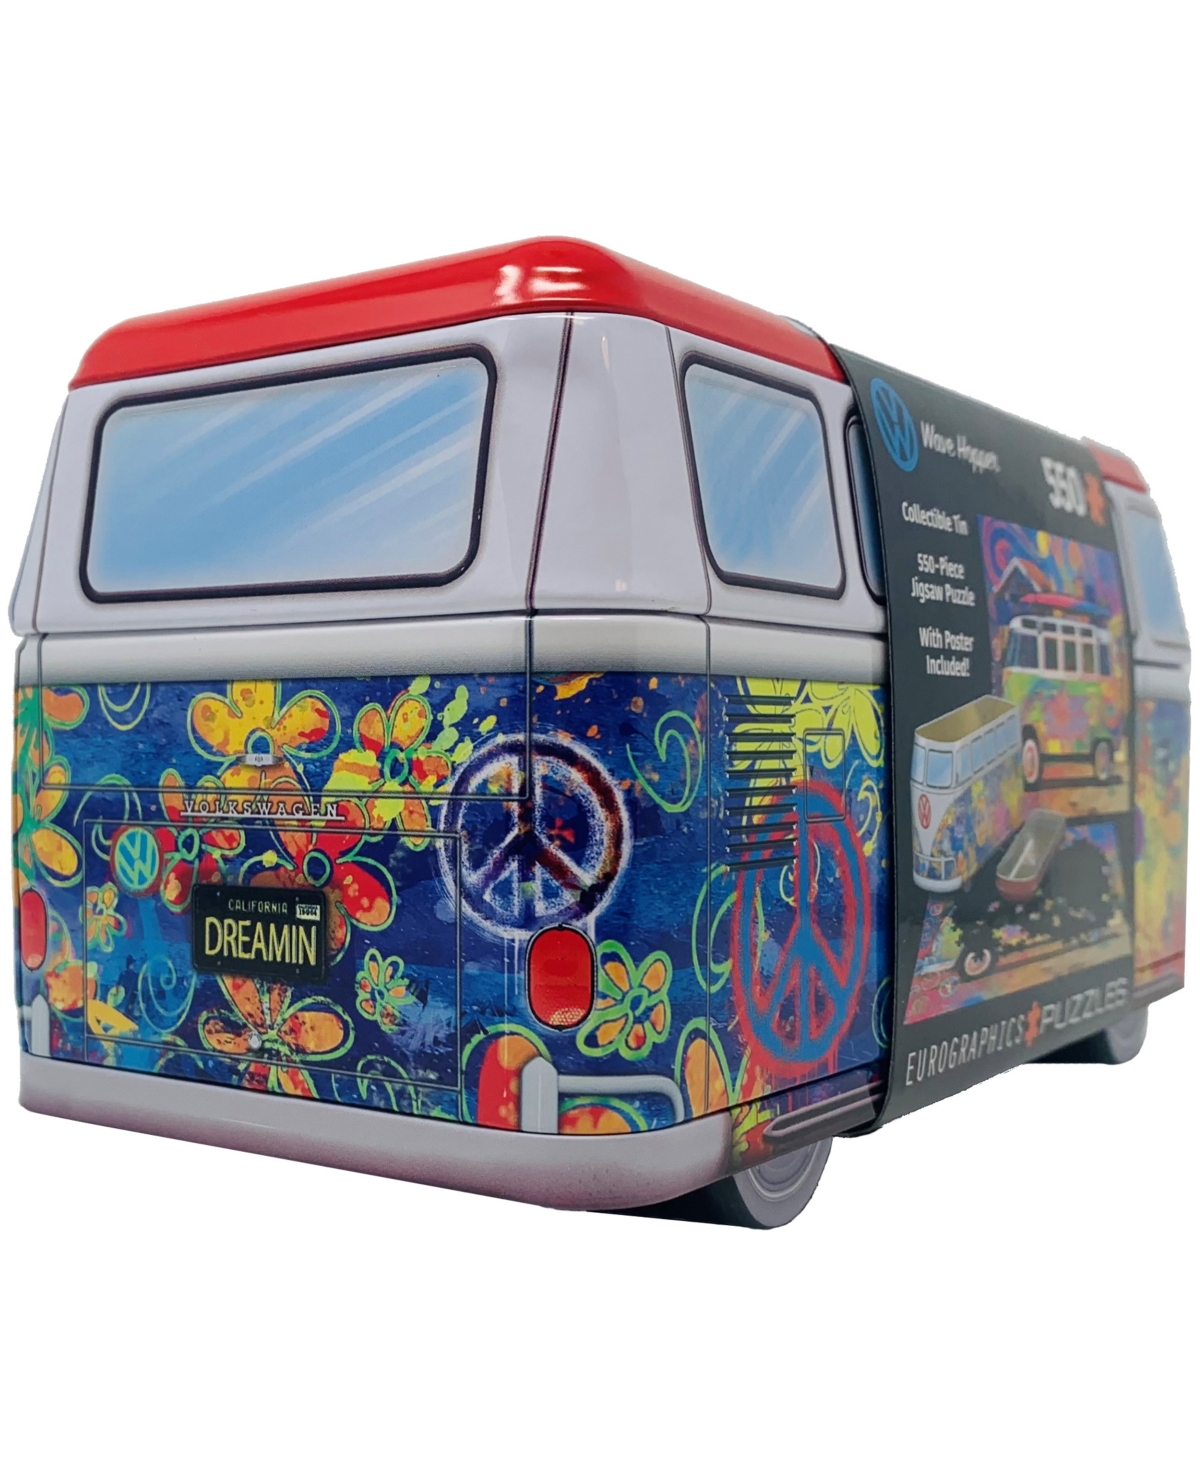 Shop University Games Eurographics Incorporated Volkswagen Wave Hopper Collectible Bus-shaped Tin Puzzle, 550 Pieces In No Color